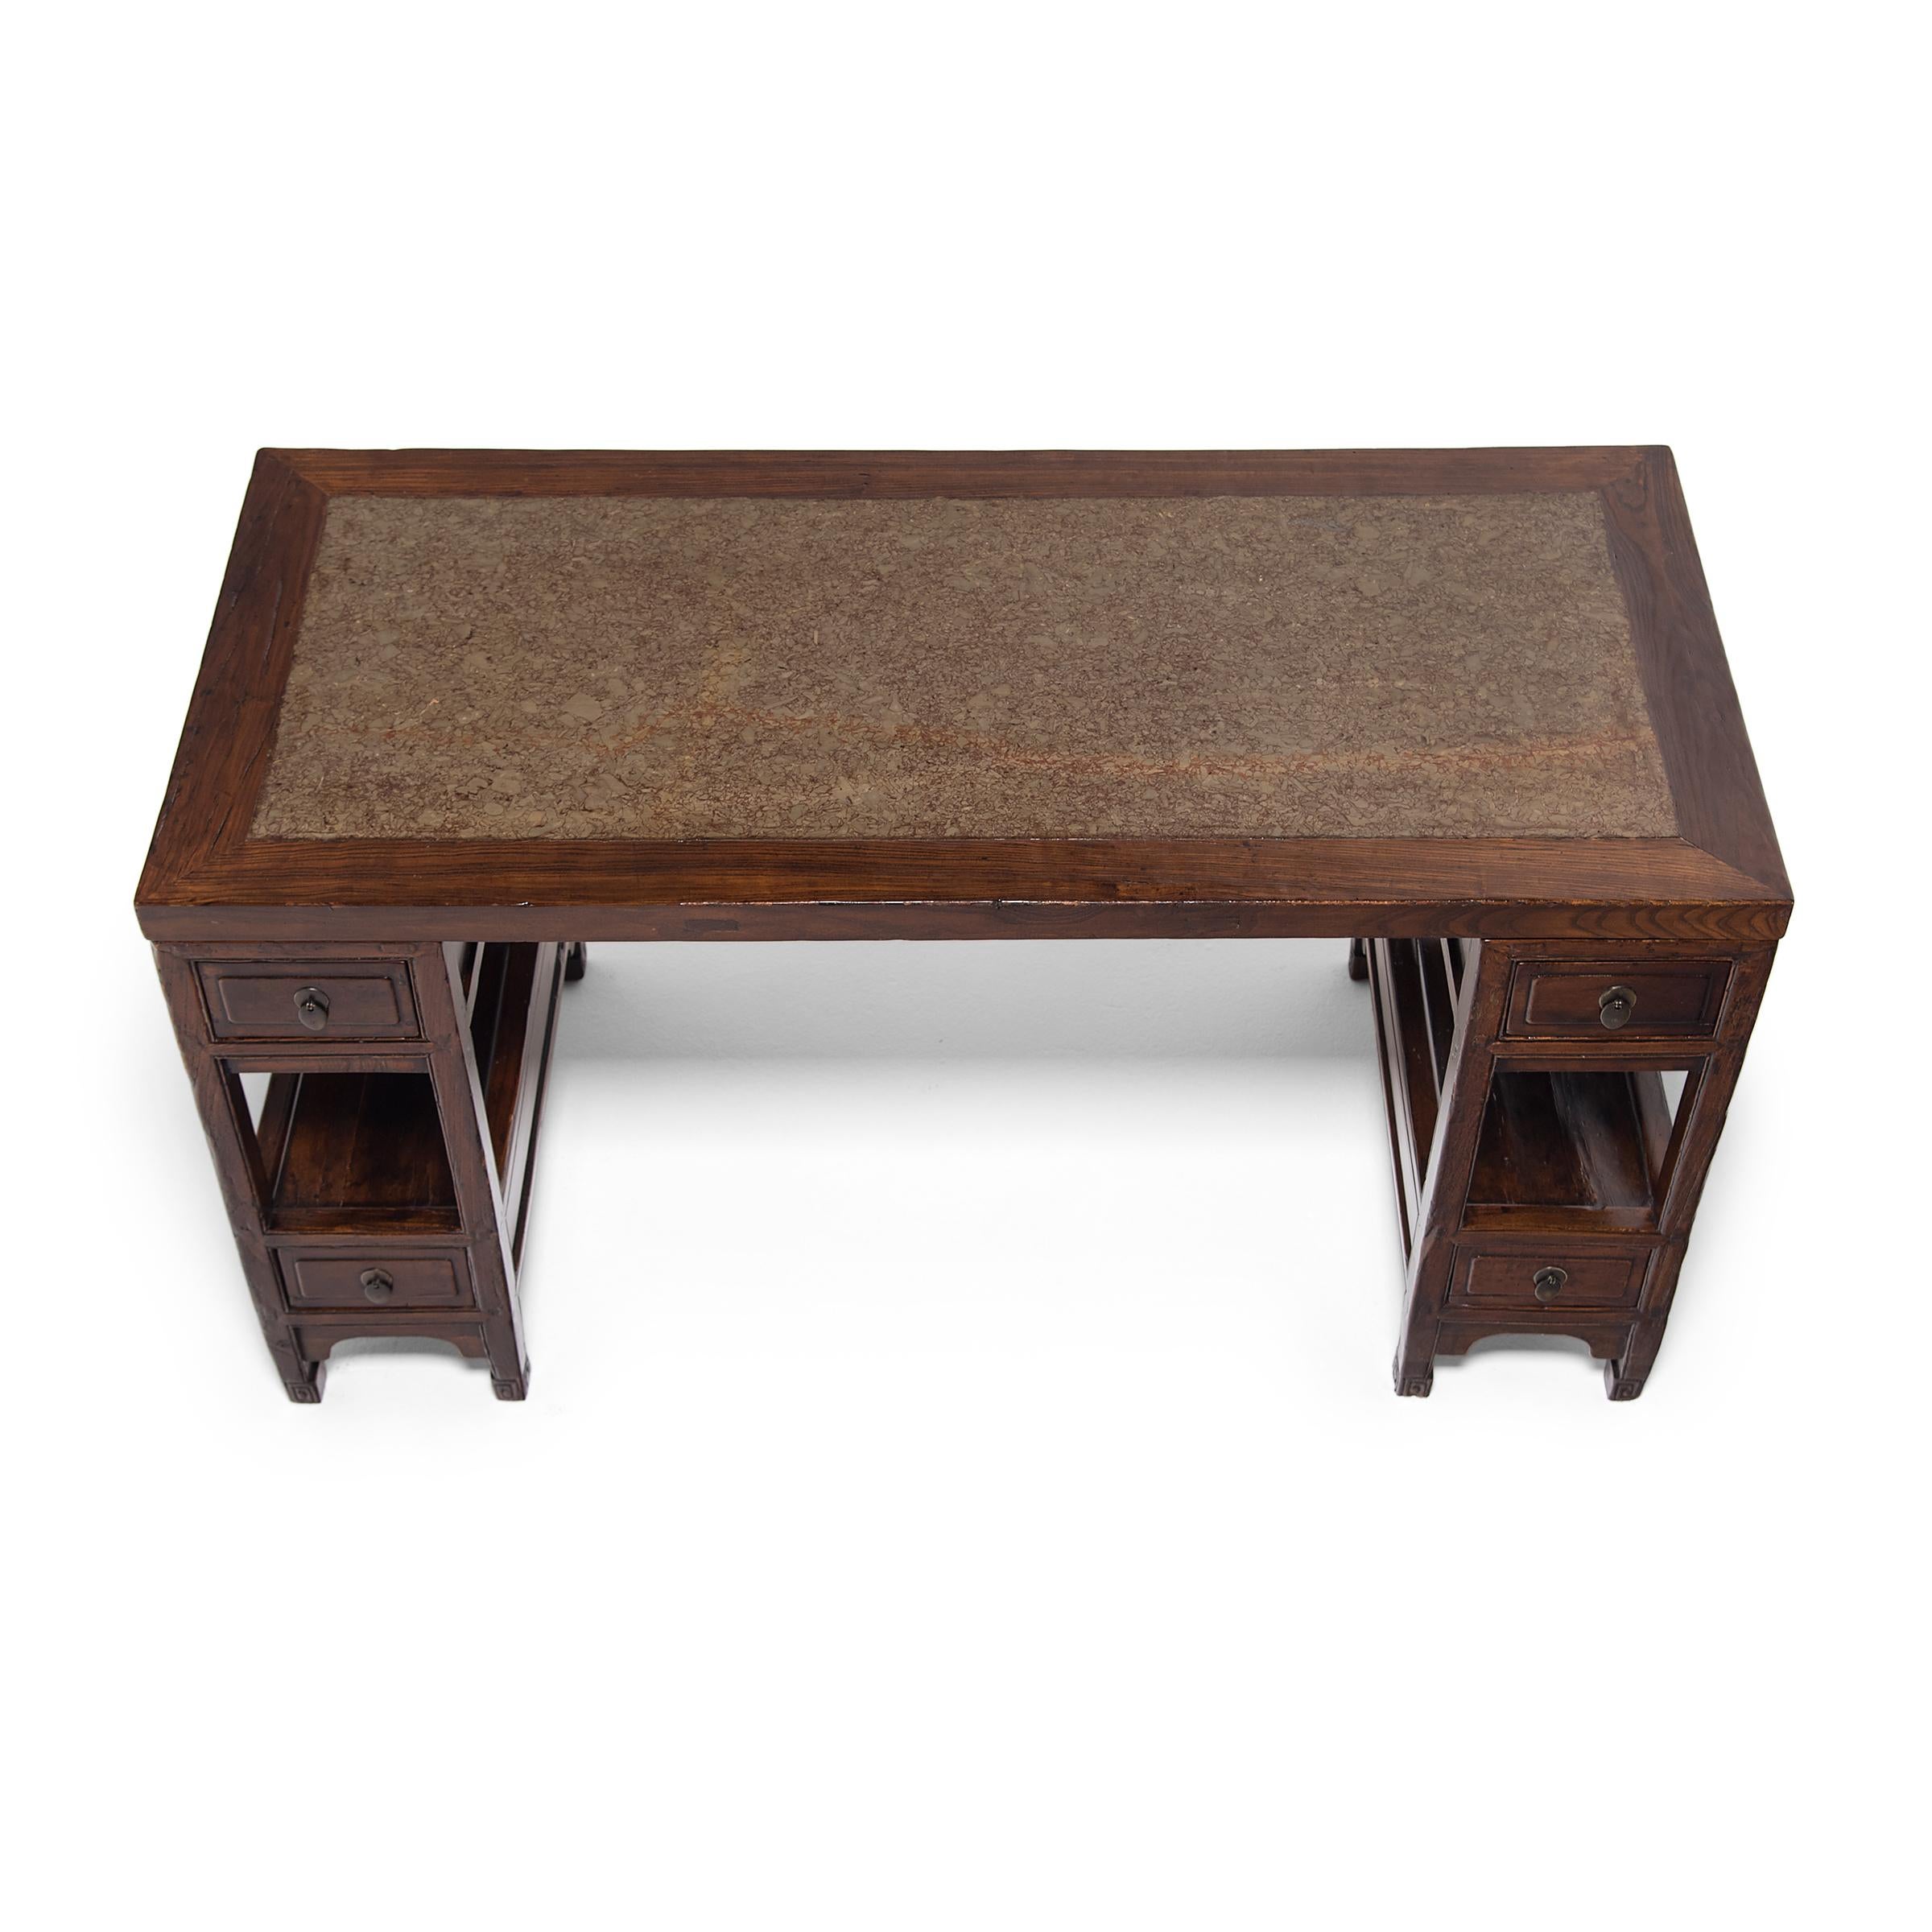 Finely crafted of lacquered elmwood, this stone top writing desk once stood centerpiece in the luxurious office of a well-to-do professional of the late Qing-dynasty. Known as a partner's desk or doctor's desk, the elegant writing table is a